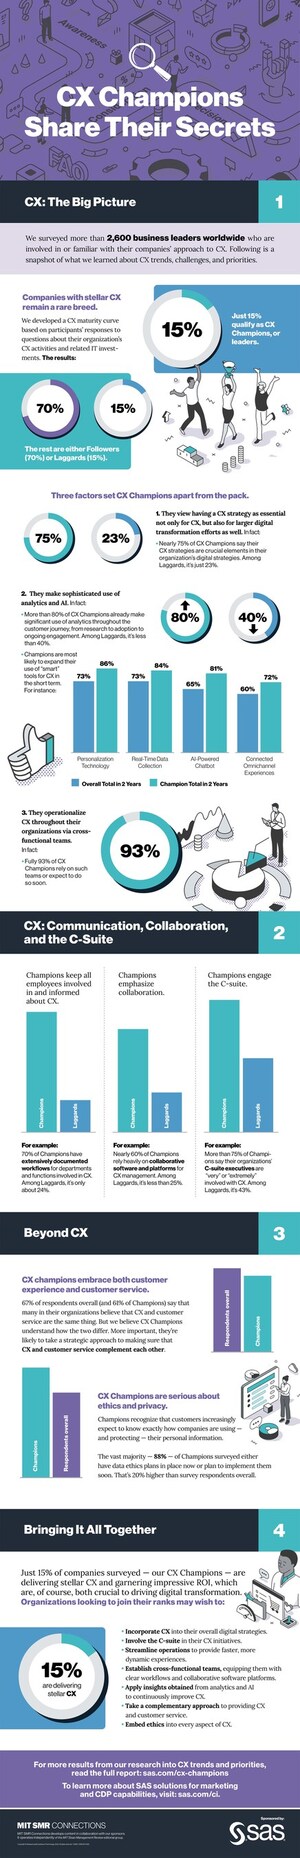 MIT SMR Connections Study: AI is the power tool of CX